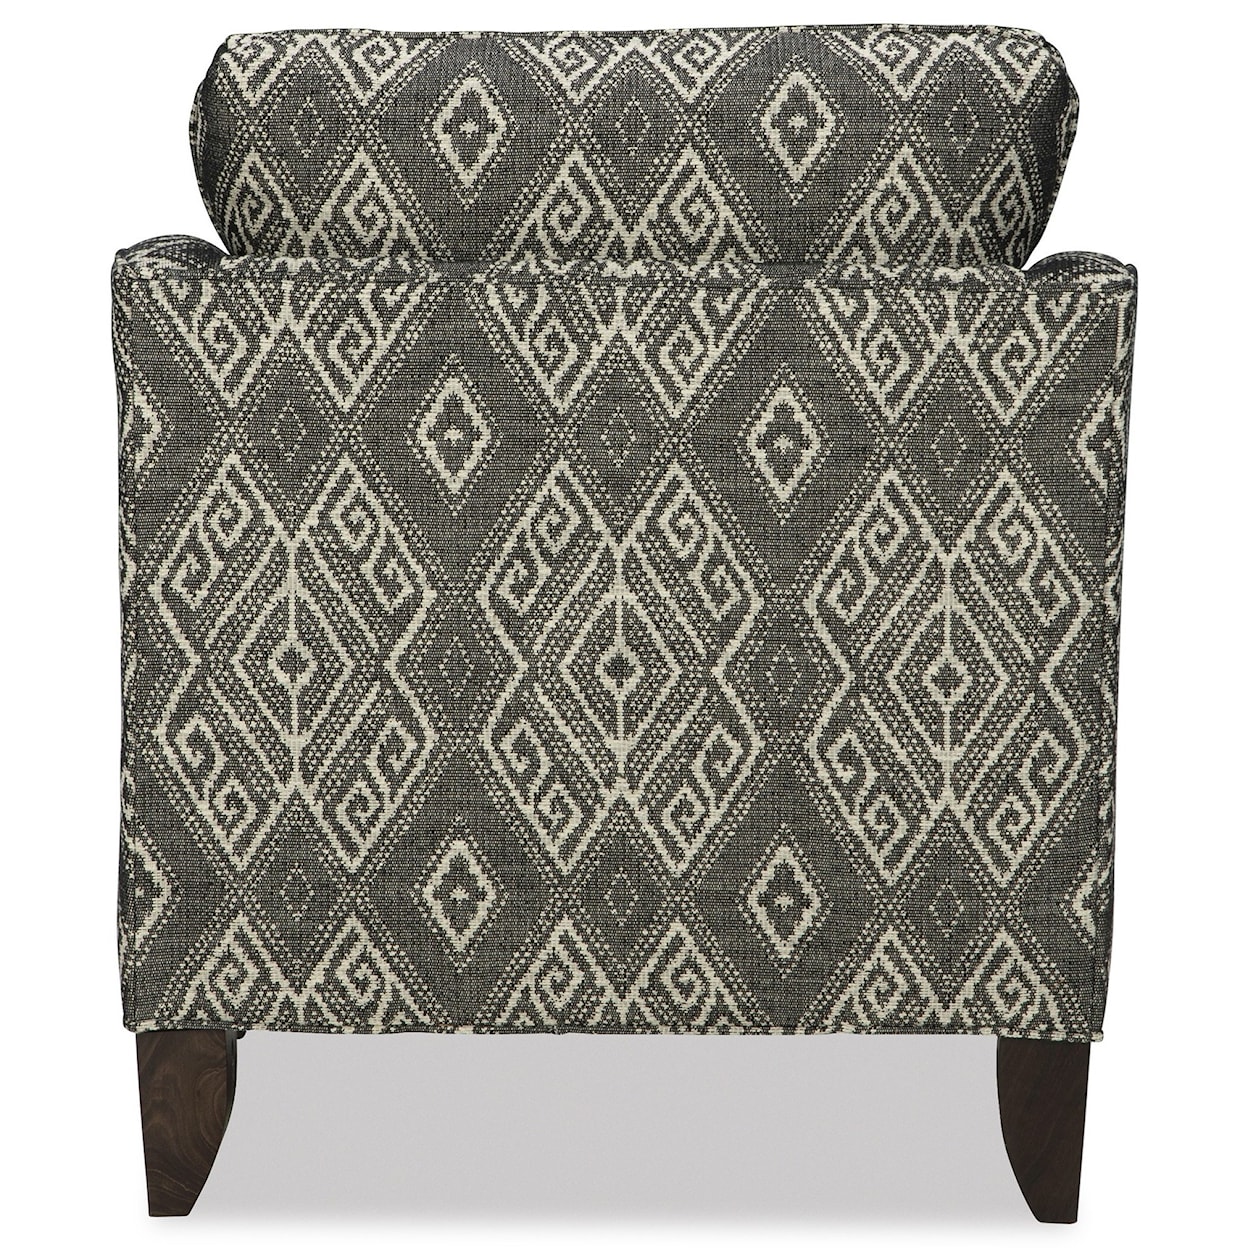 Craftmaster Accent Chairs Chair